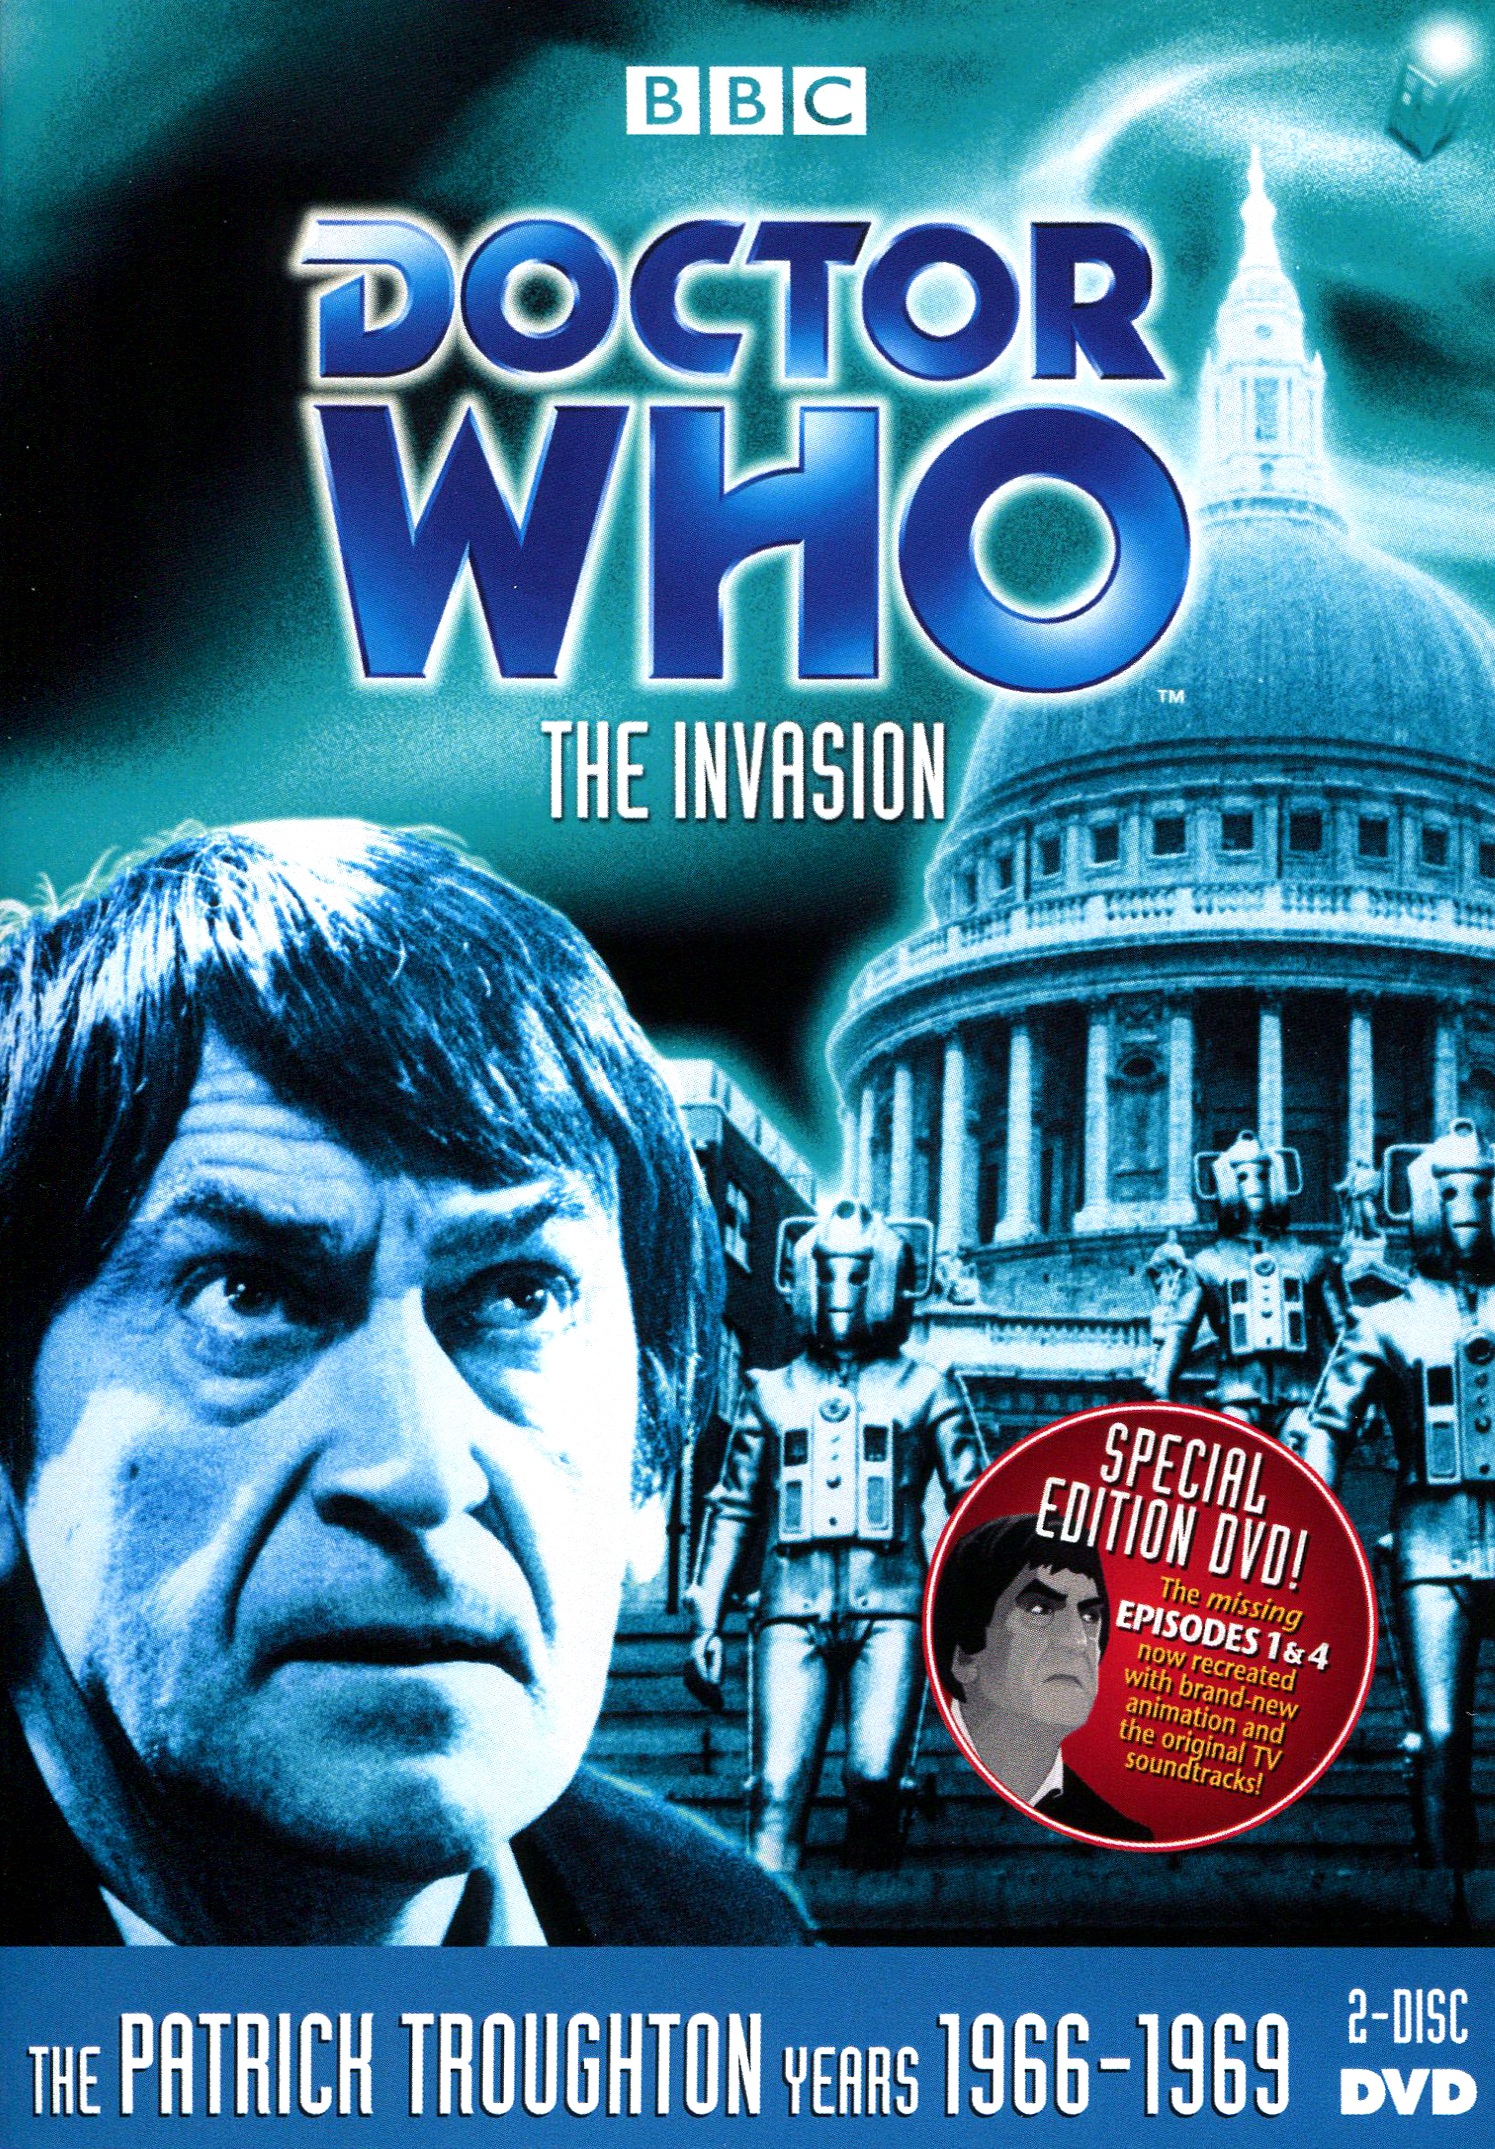 Doctor Who: The Animation Collection (DVD)